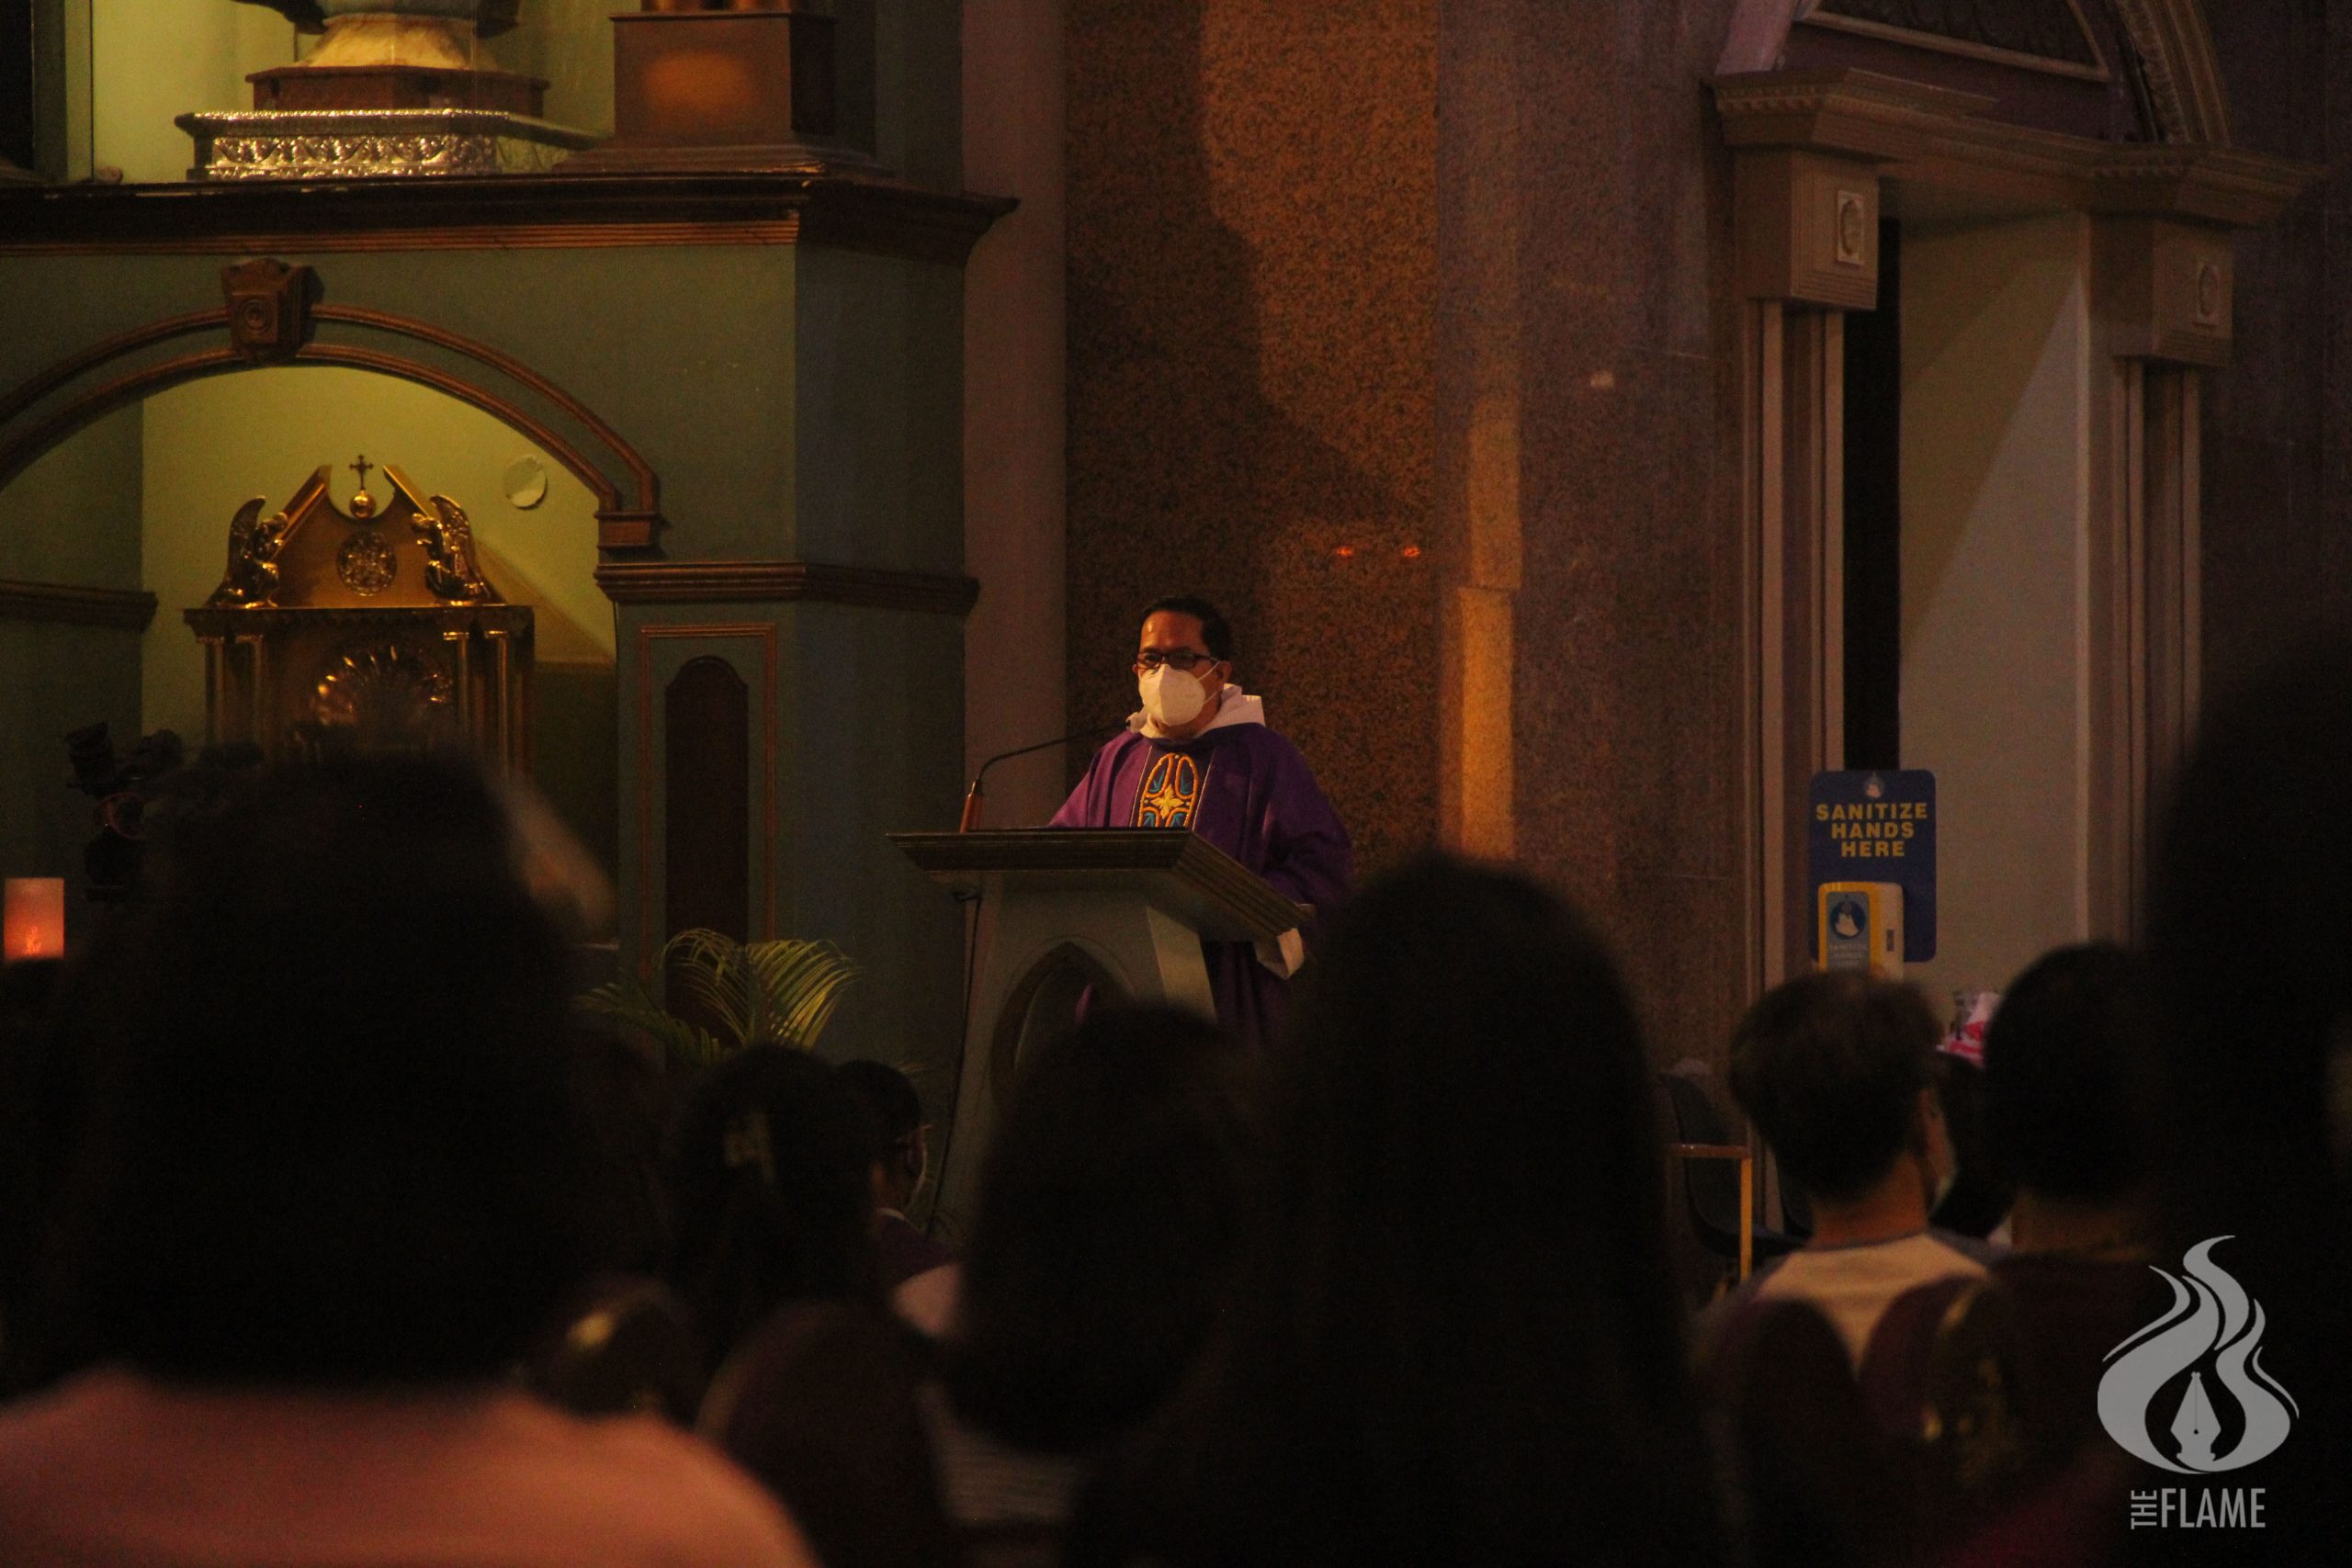 Dominican priest urges Thomasians to remain hopeful during Lenten season